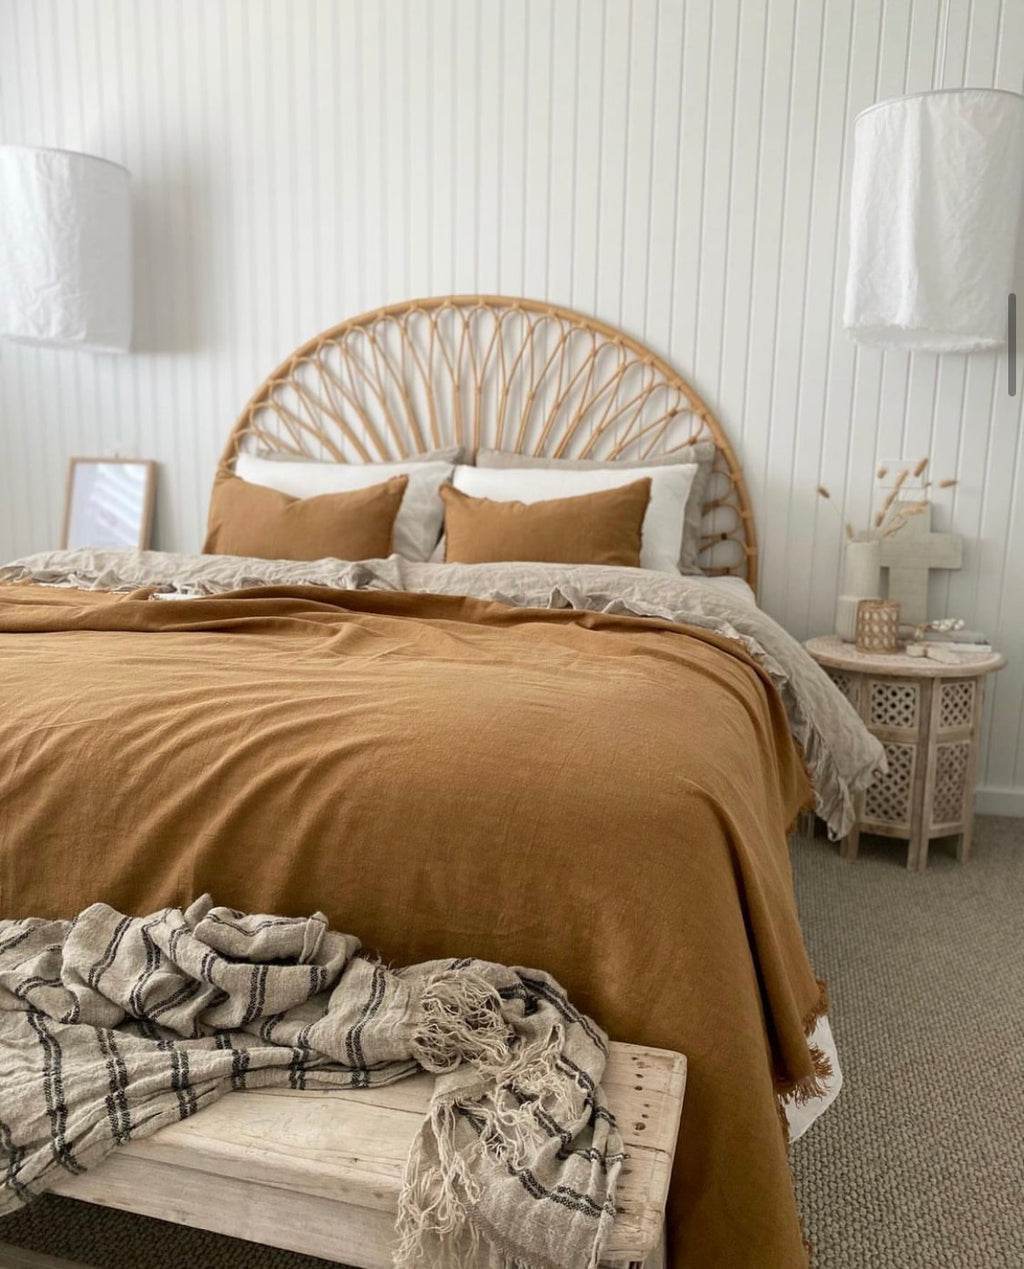 RAMIE FRINGED THROW BLANKET - CINNAMON / BROWN. Made from 100% ramie & hand-finished with a soft, fringed border for a relaxed look & feel. The extra-long design drapes generously over either side of your bed, creating a cozy, layered look. Available in Queen & King size.